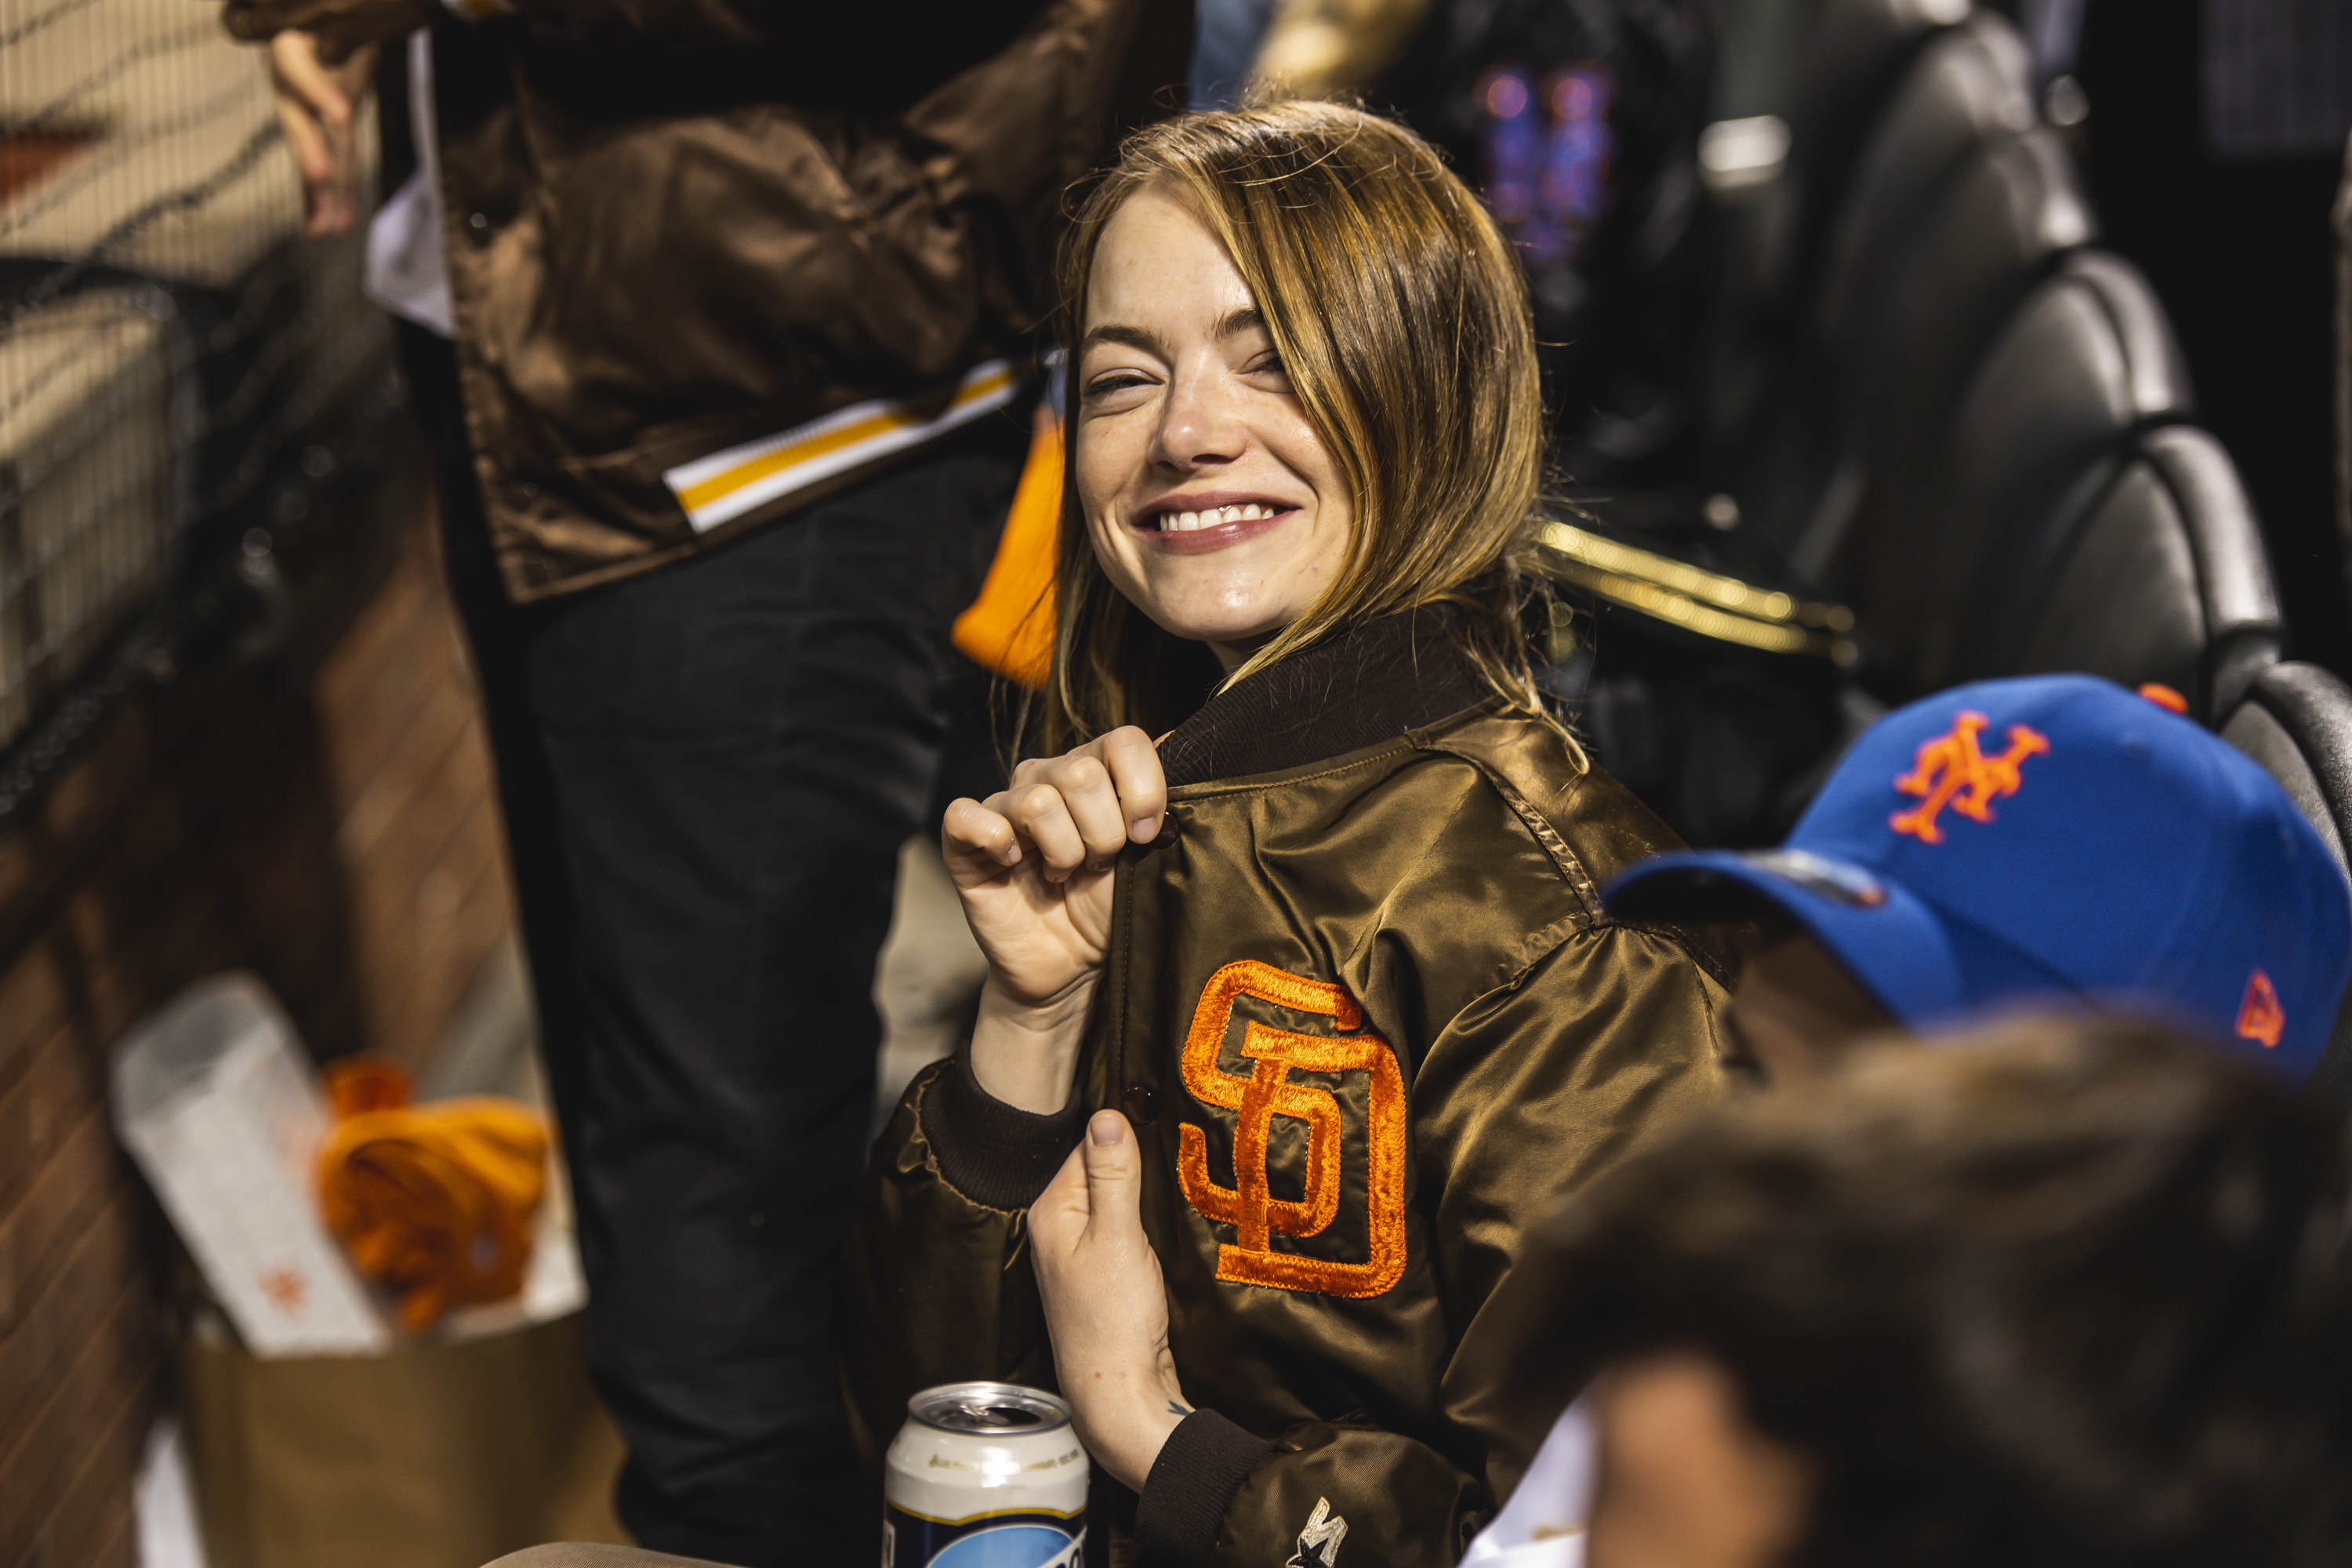 Emma sits in the crowd and shows off the baseball logo on her jacket